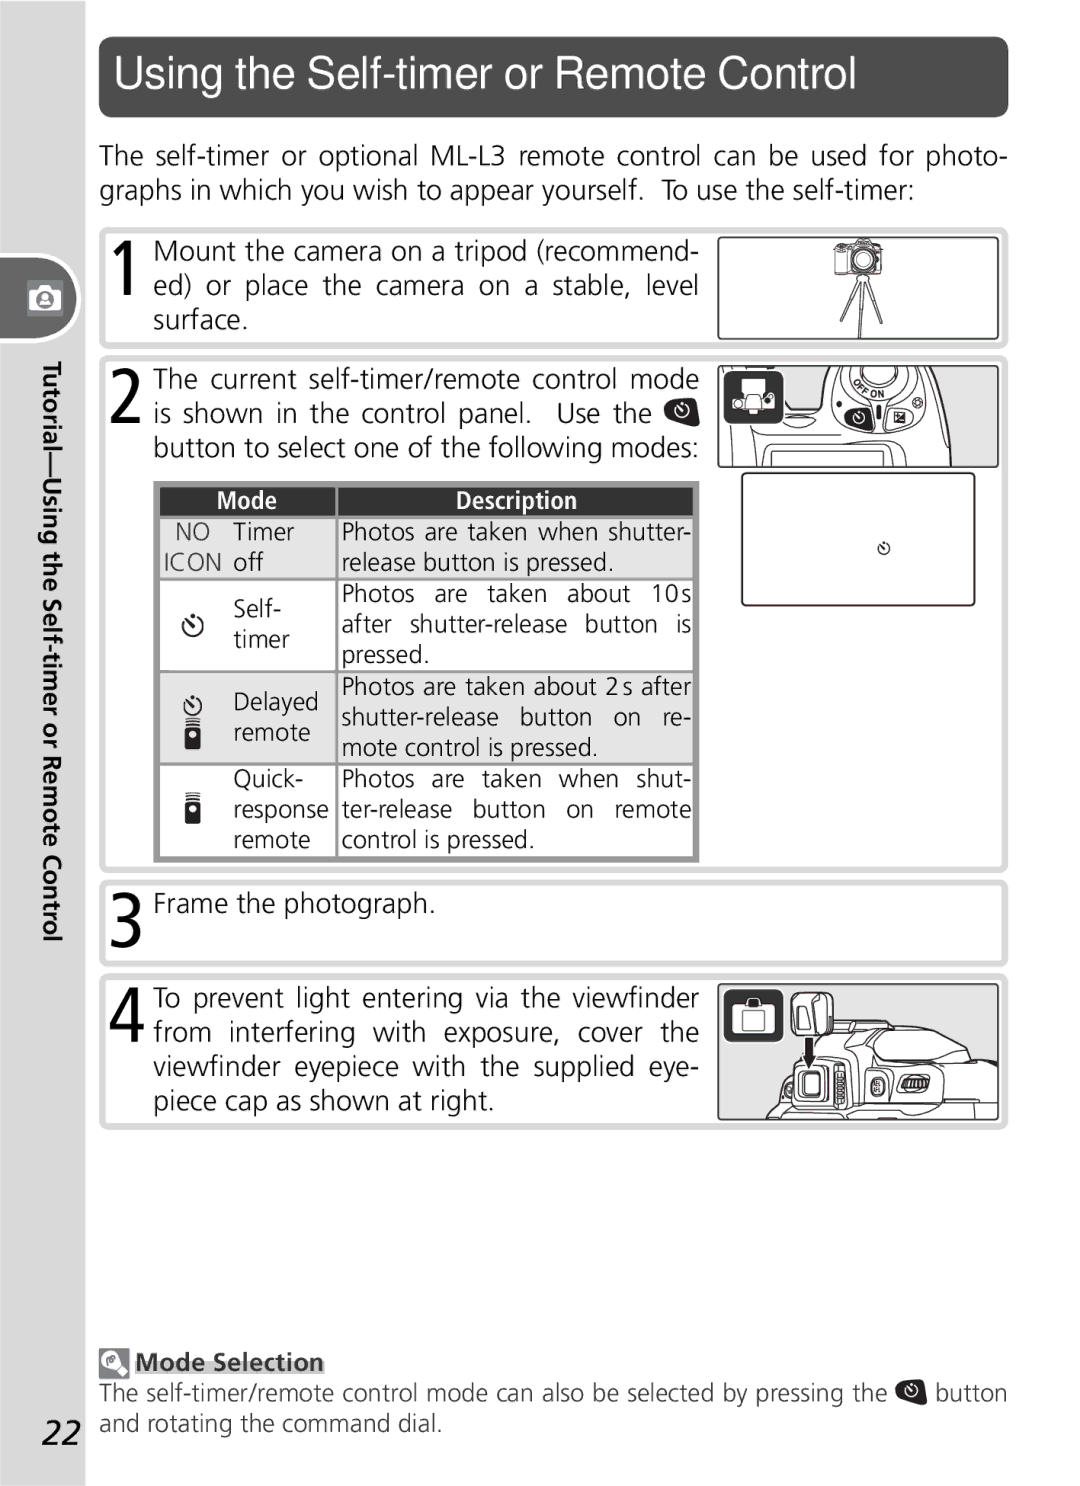 Nikon D50 manual Tutorial-Using the Self-timer or Remote Control, Mode Selection 